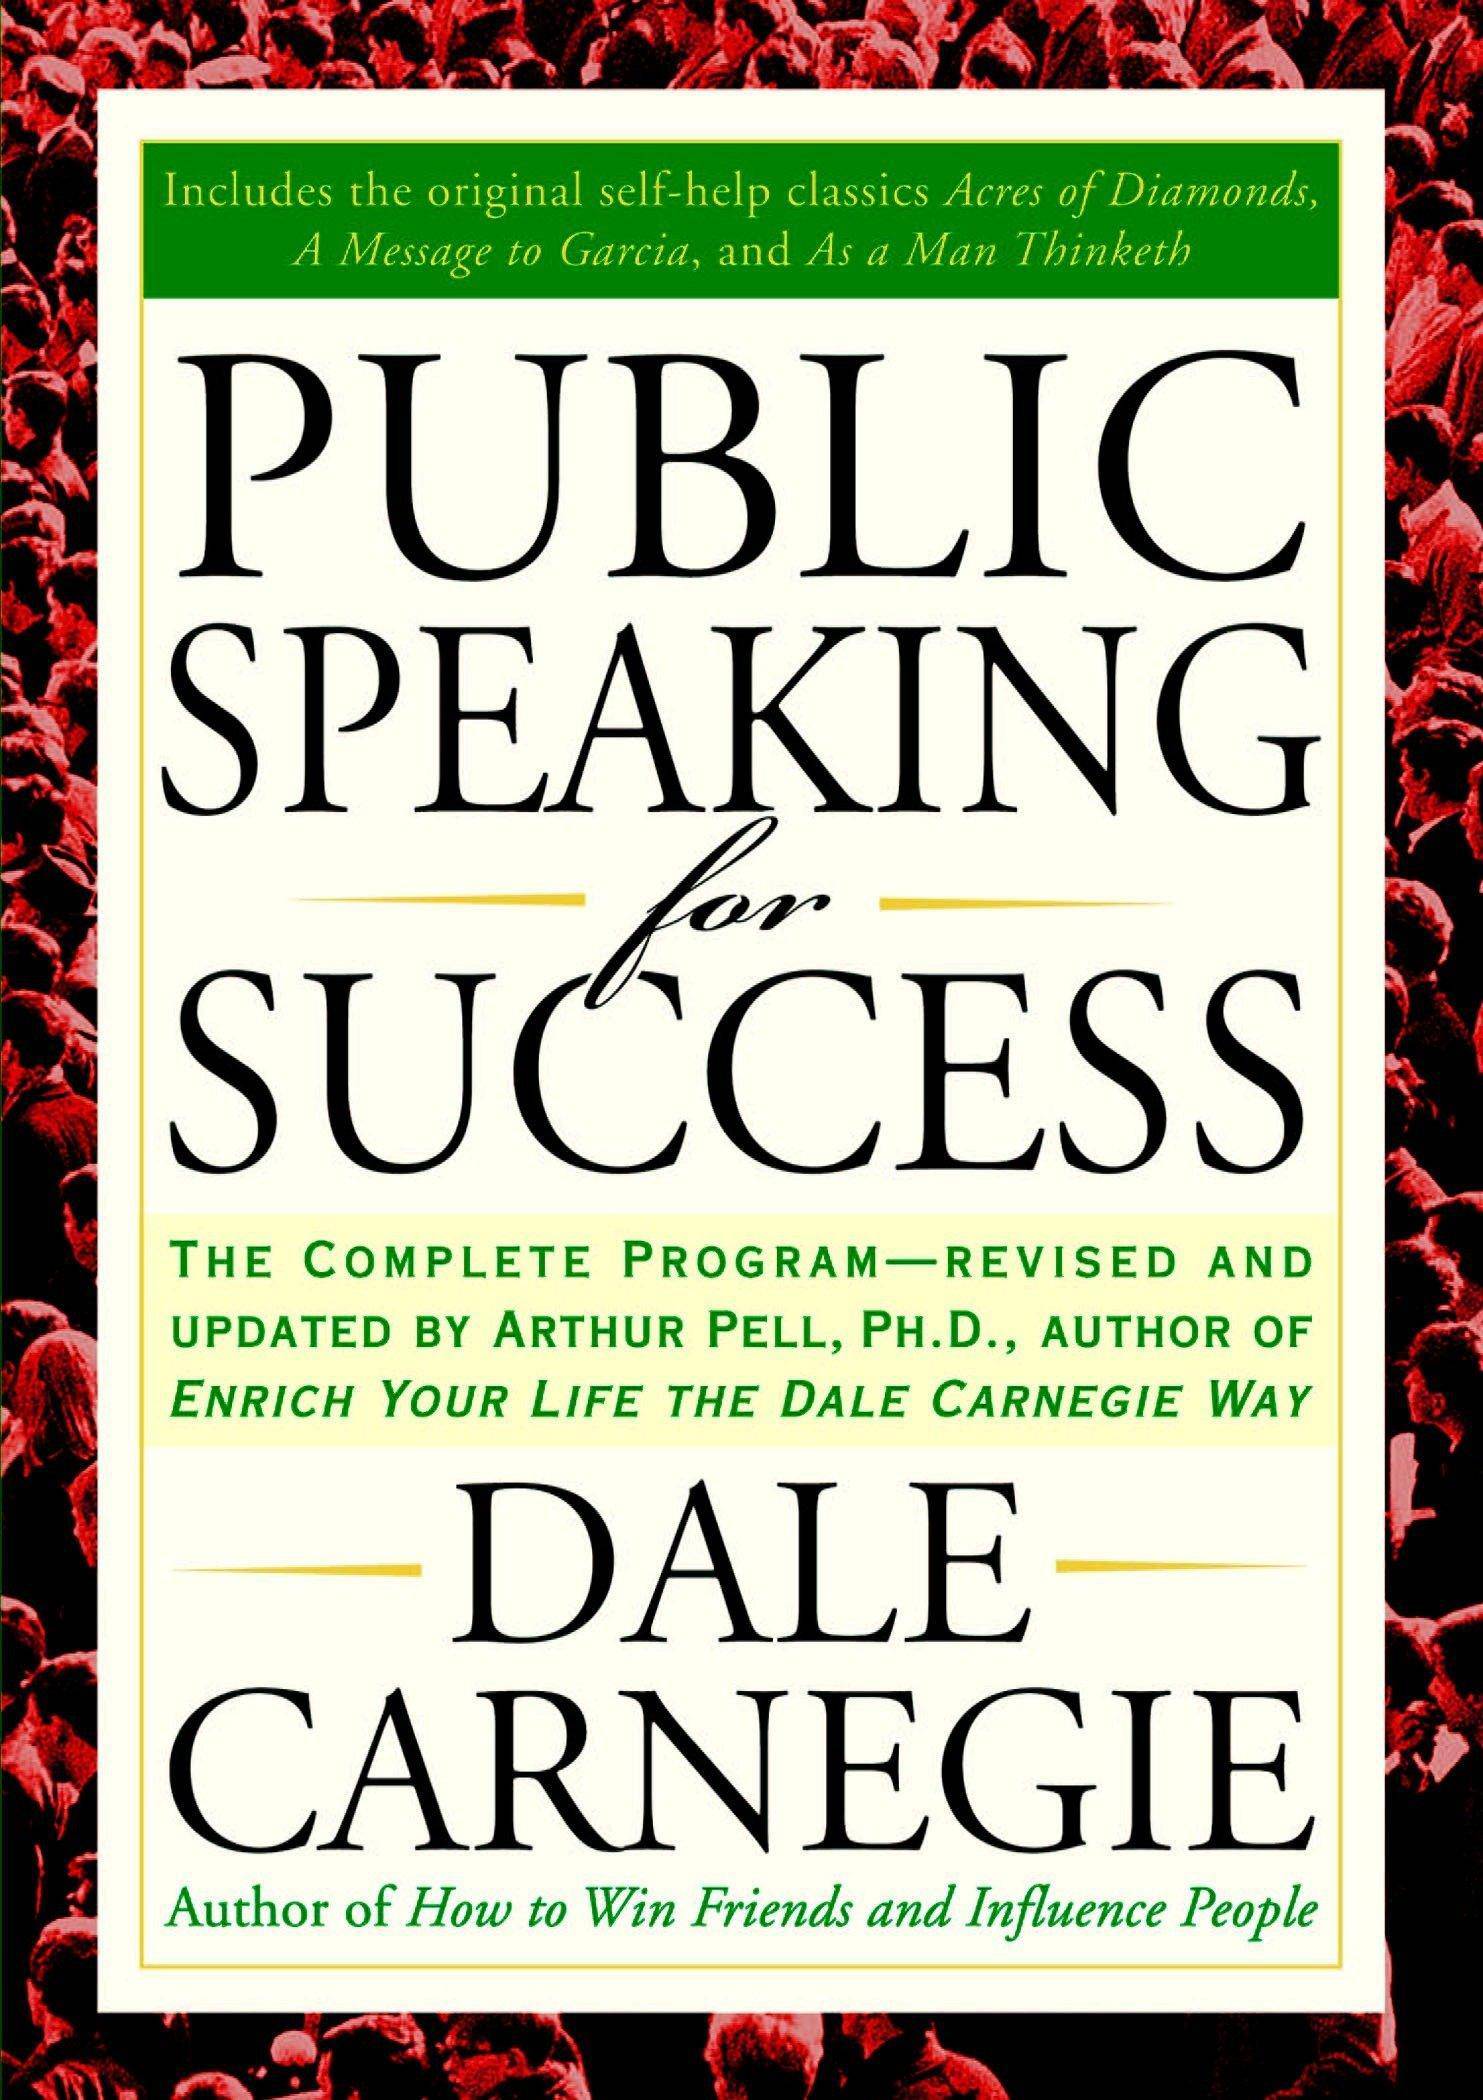 Public Speaking For Success: The Complete Program, Revised And Updated - SureShot Books Publishing LLC